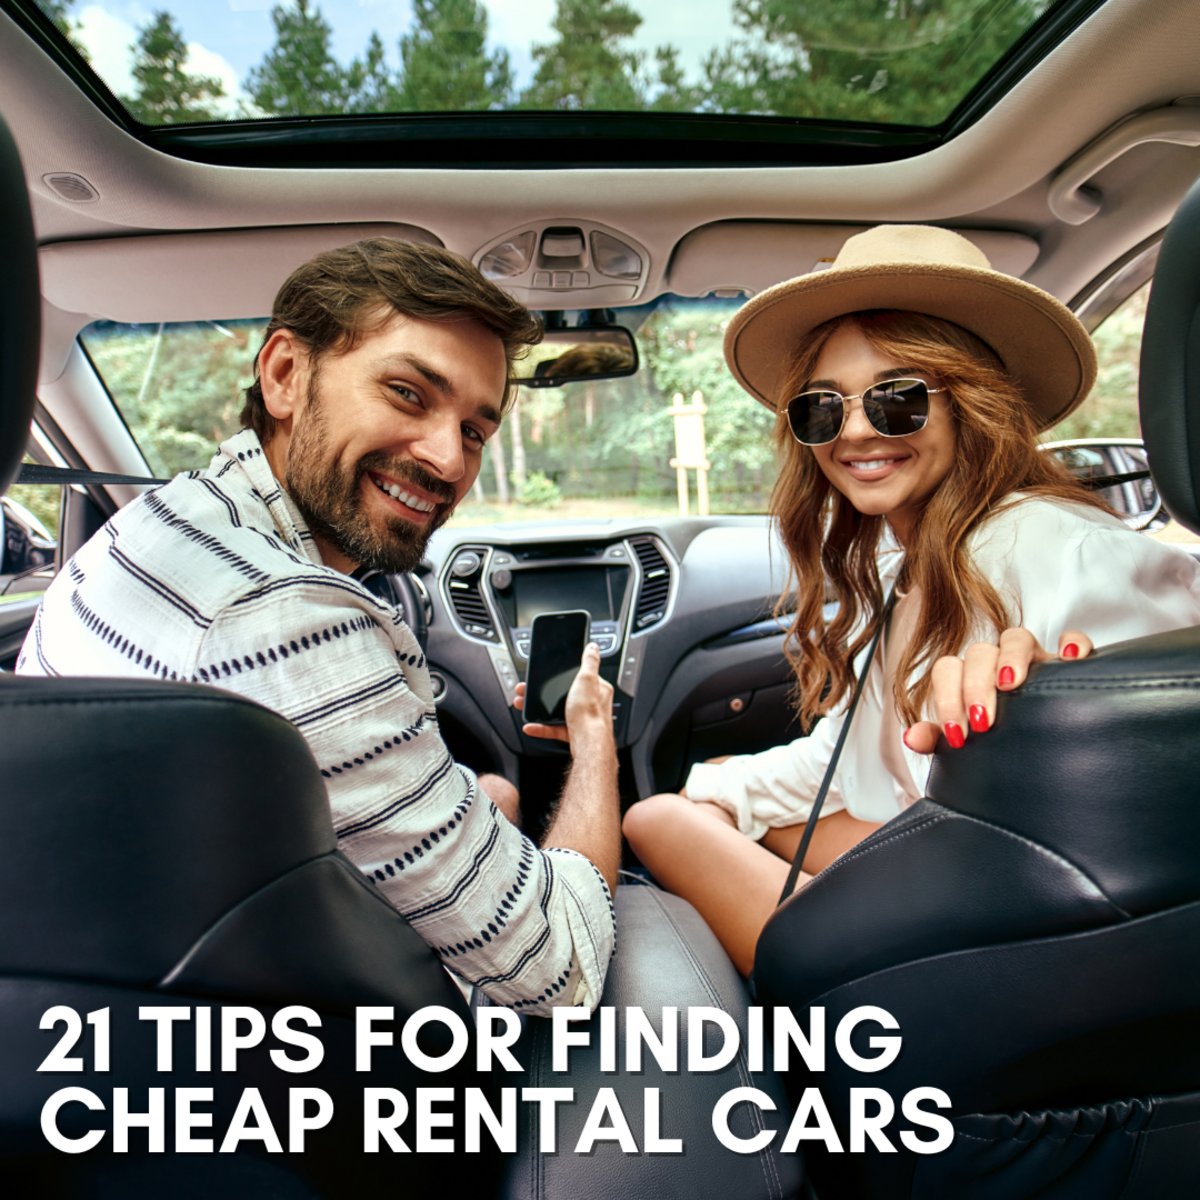 Planning on hitting the open road on your way to Galveston? 🚗 Read these 21 tips for scoring sweet deals on #rentalcars so that you can explore without breaking the bank. bit.ly/3uBCqBJ #roadtrip #savvytraveler